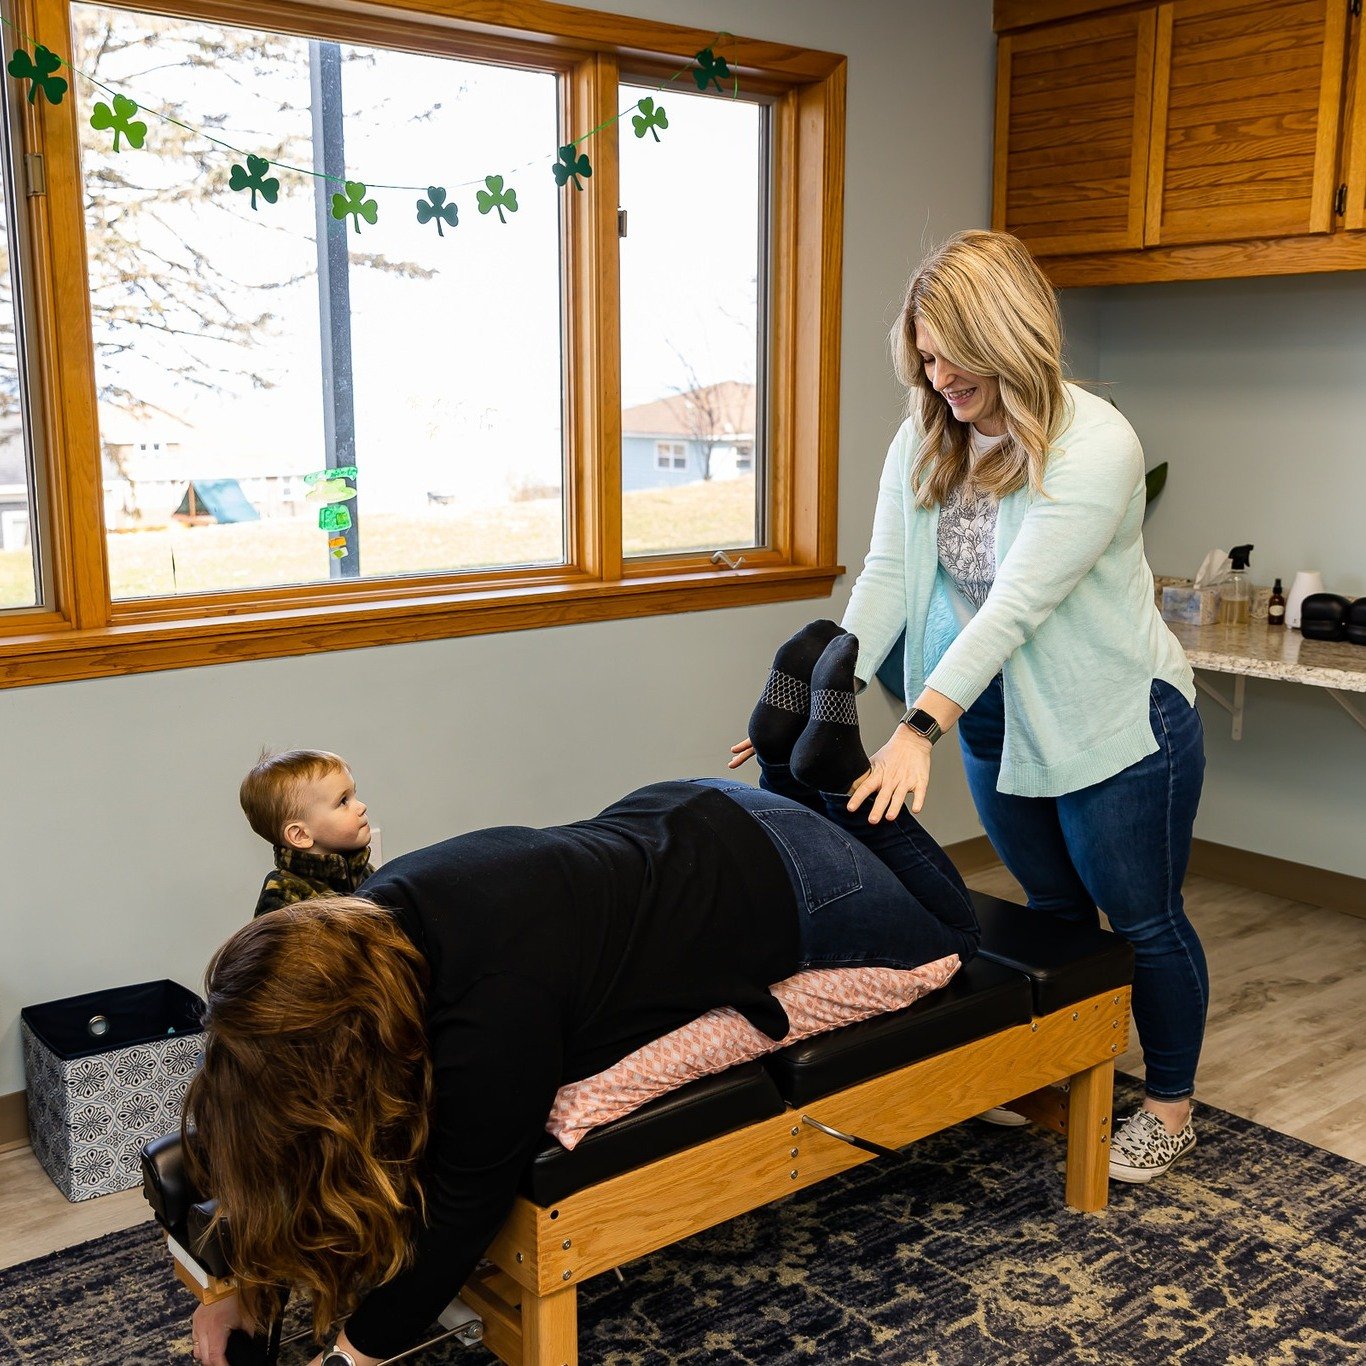 &quot;During my first trimester of pregnancy, I was fortunate enough to discover Dr. Nikki. I'm experiencing less back pain, greater mobility, and overall better health. I can now enjoy precious moments with my family and toddler without discomfort. 